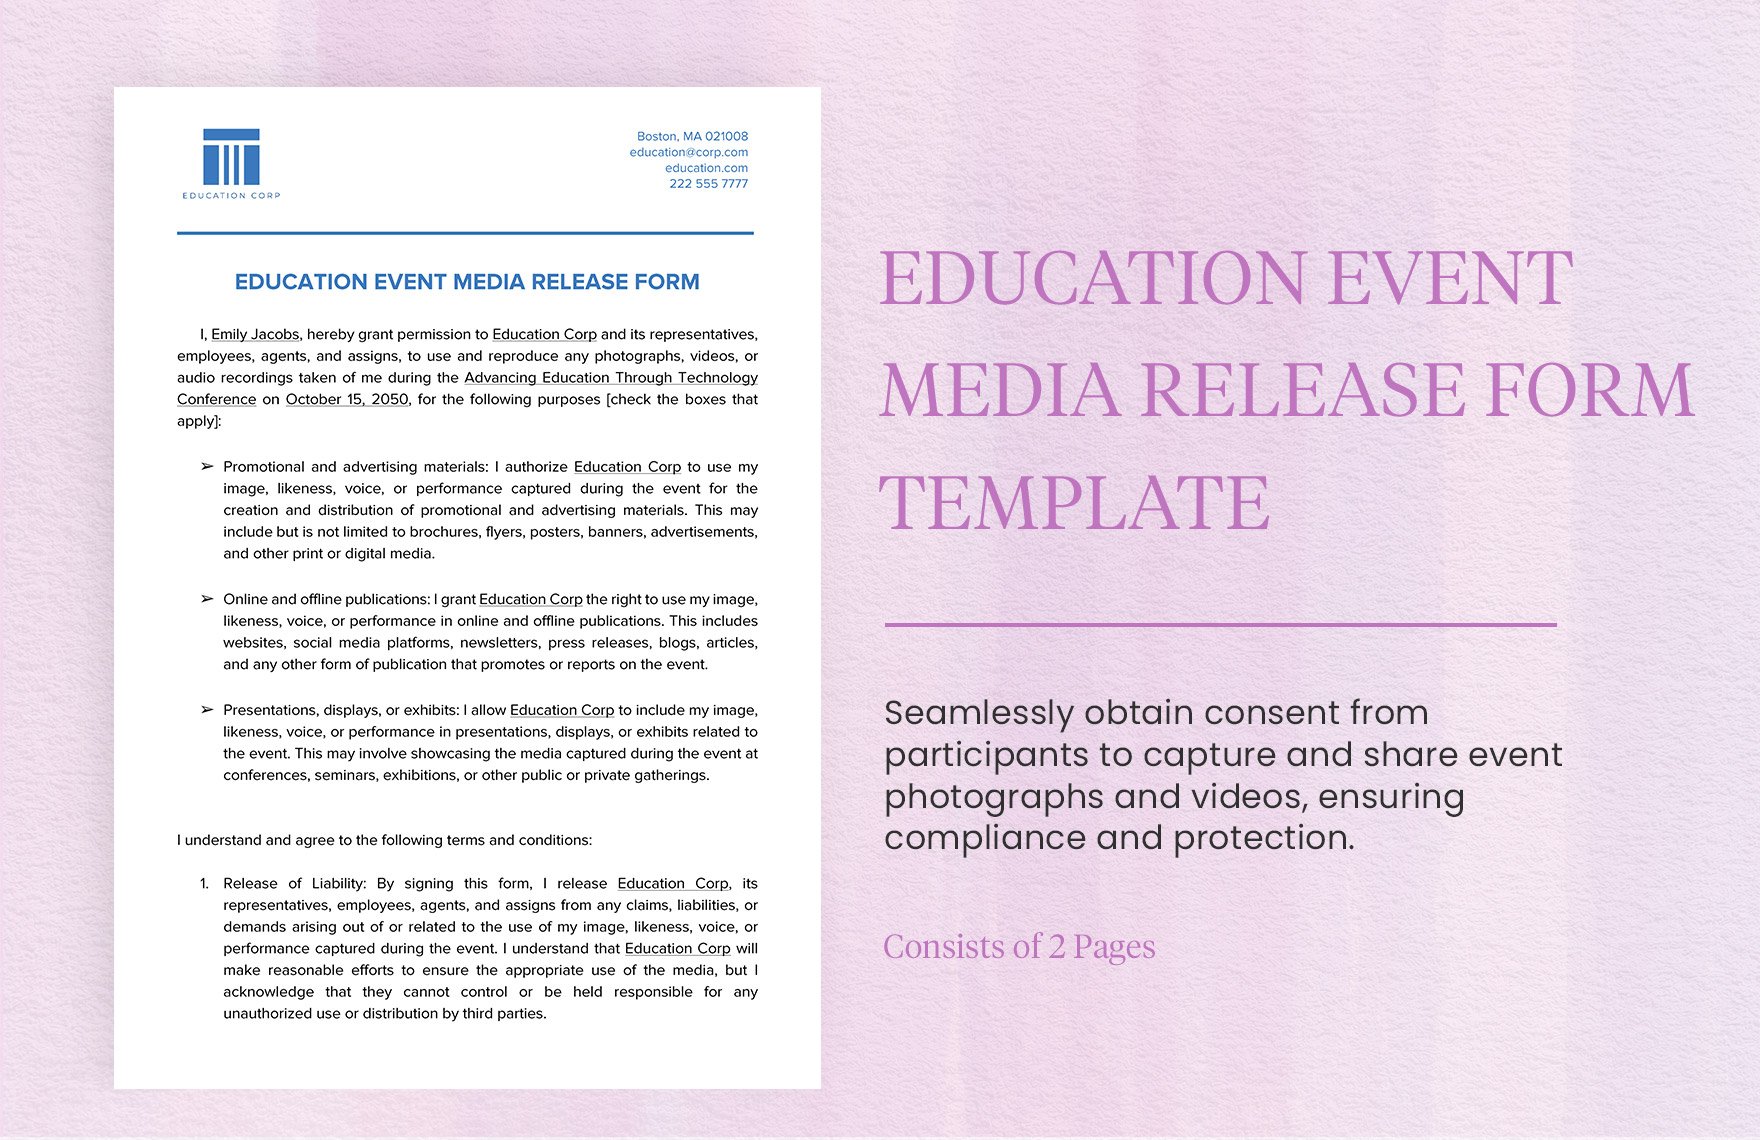 Education Event Media Release Form Template